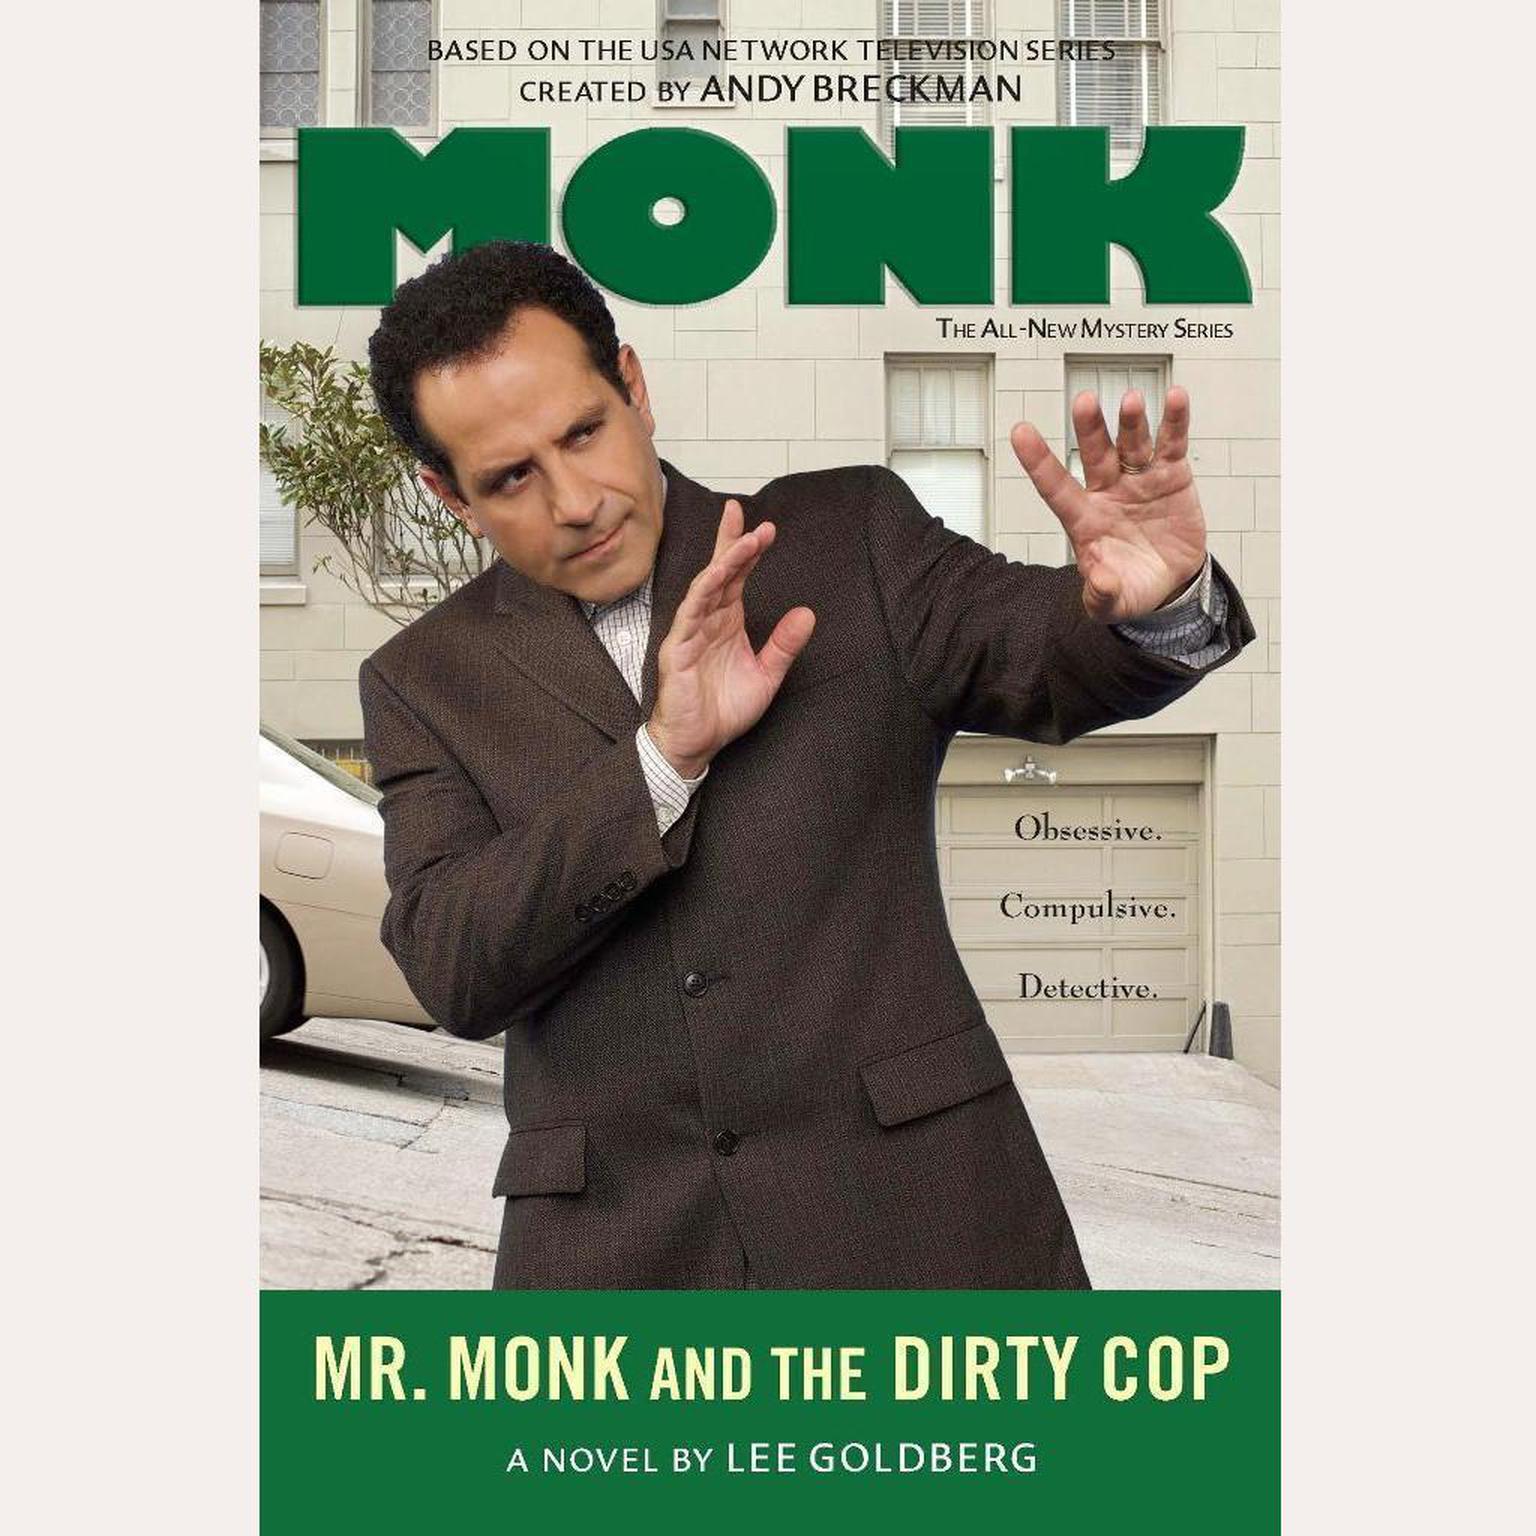 Mr. Monk and the Dirty Cop Audiobook by Lee Goldberg — Listen & Save